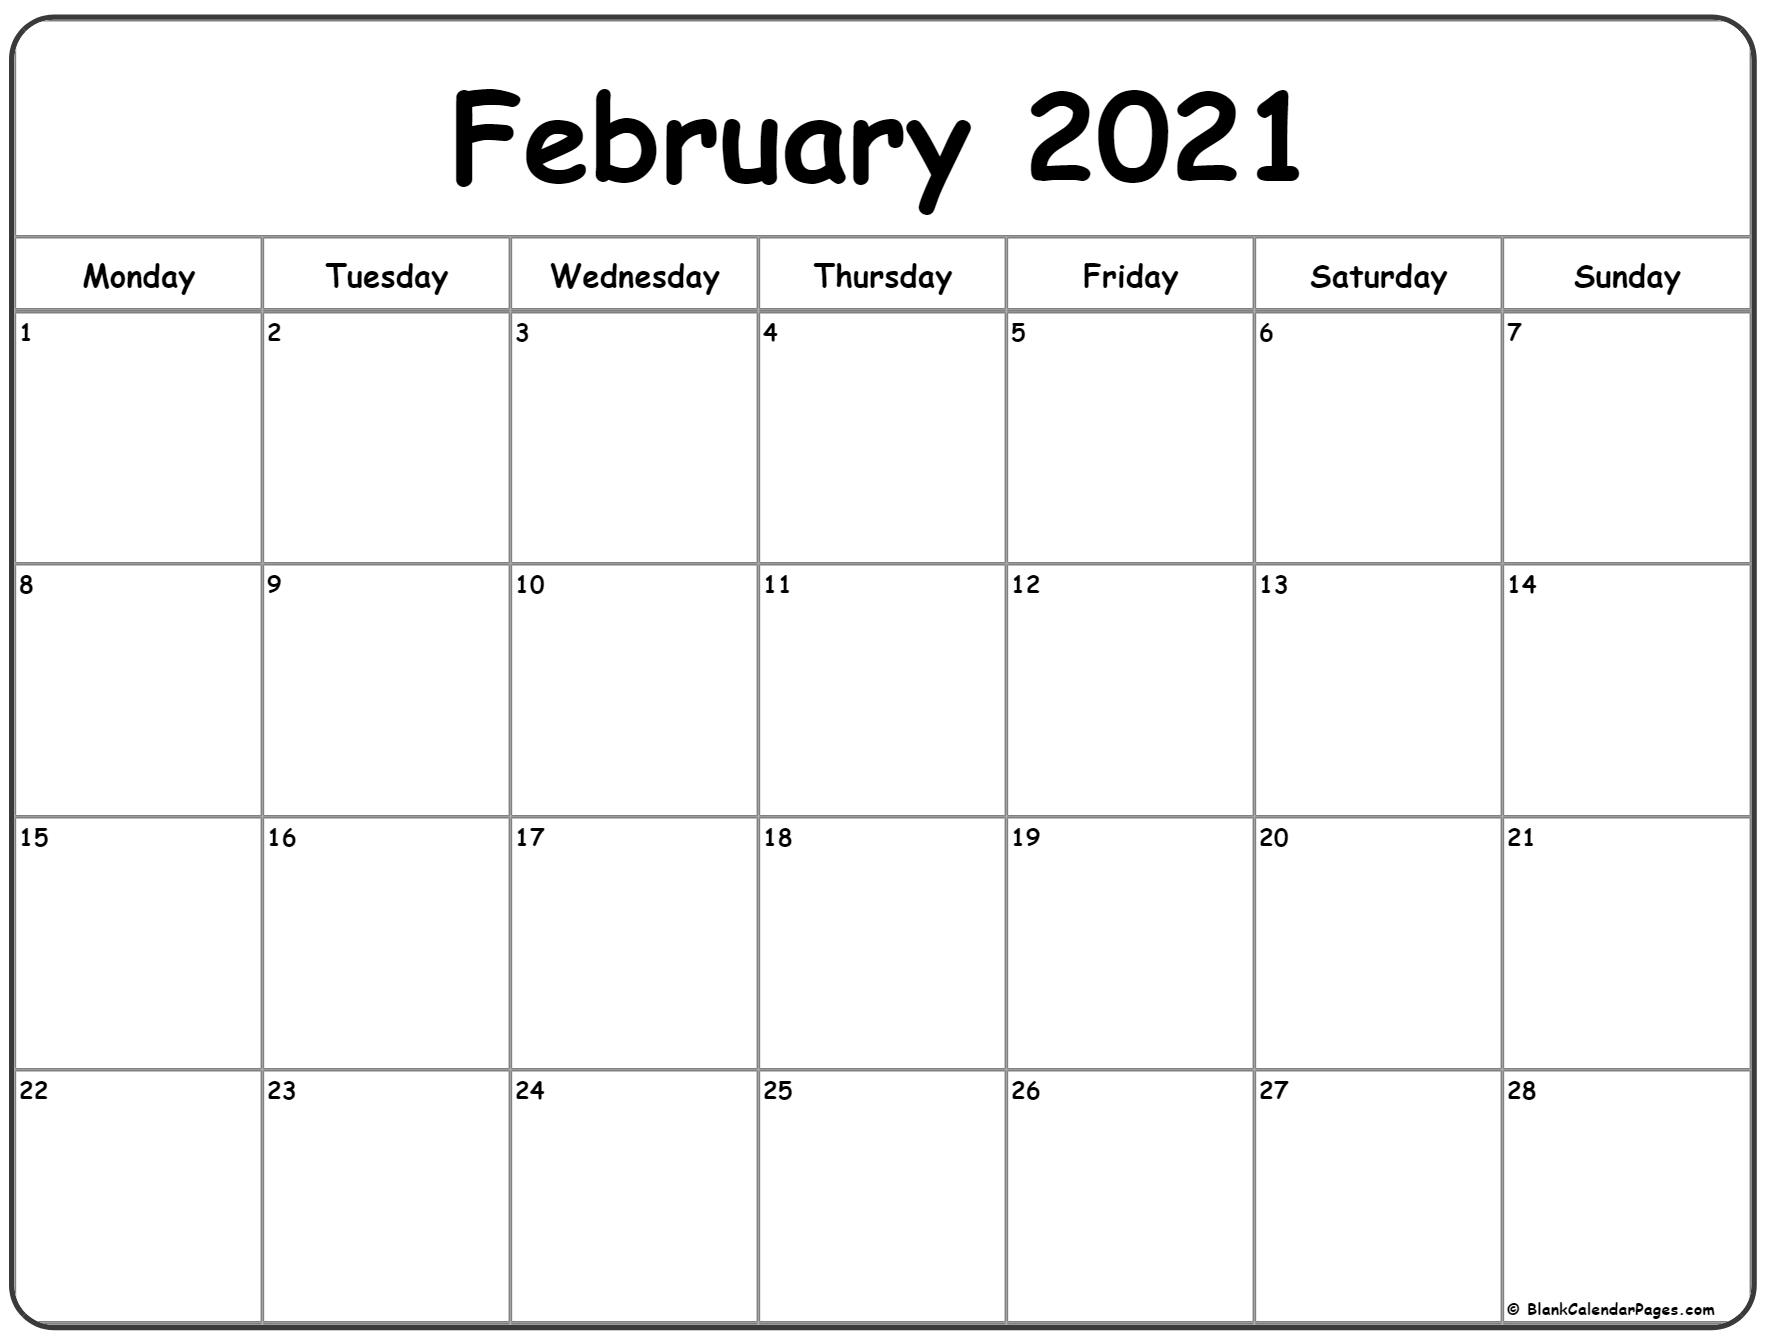 30 Free February 2021 Calendars For Home Or Office Onedesblog